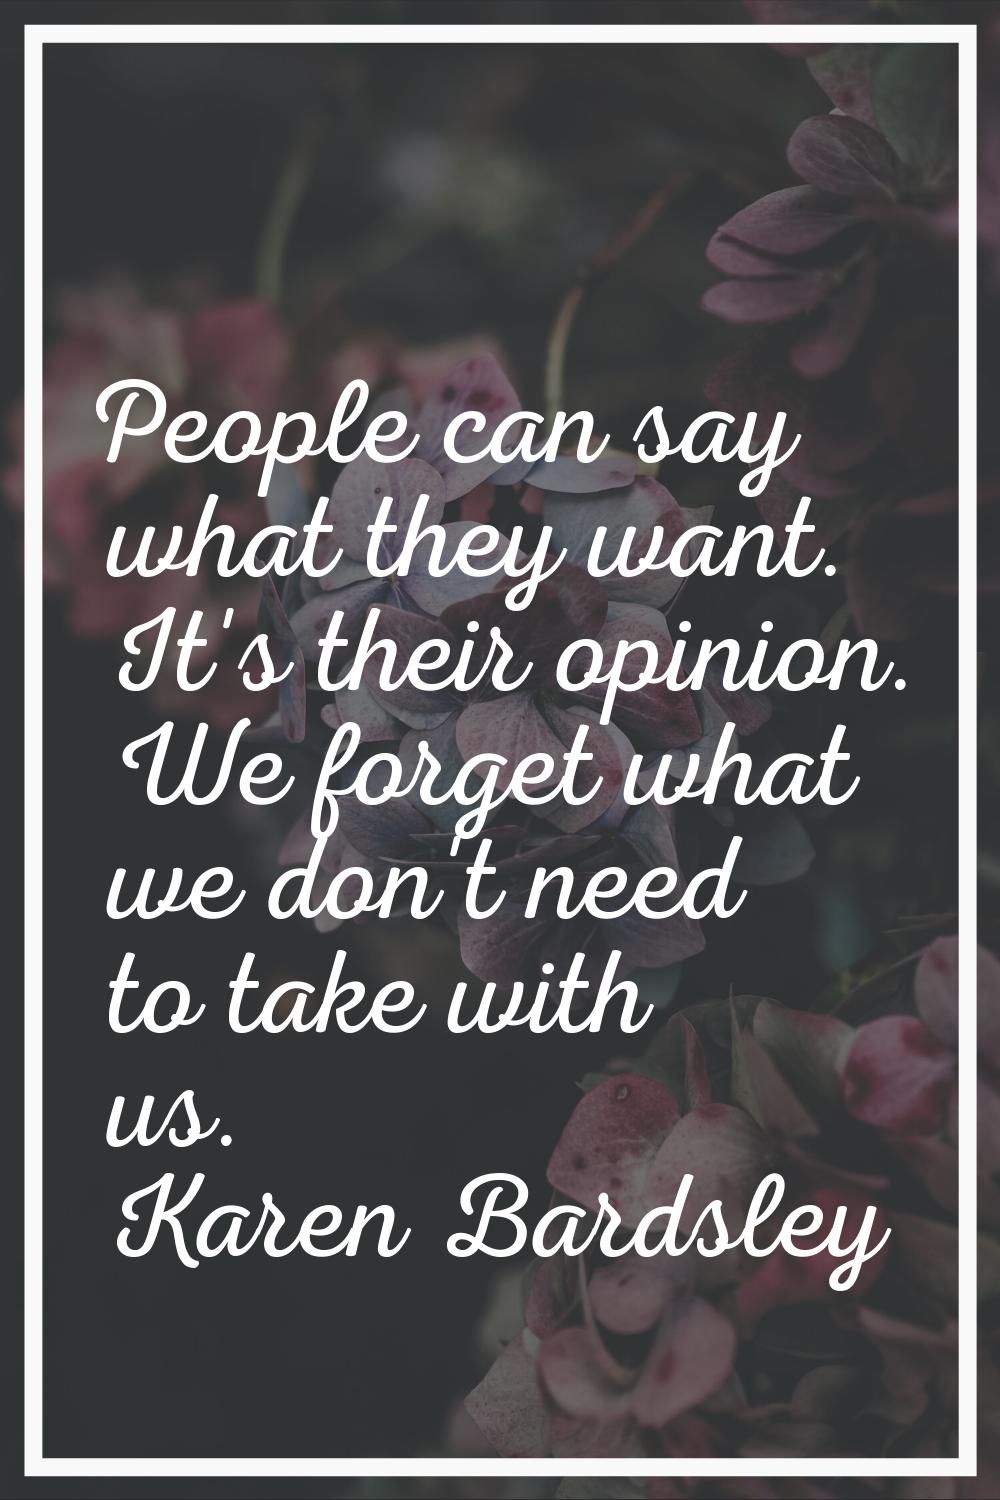 People can say what they want. It's their opinion. We forget what we don't need to take with us.